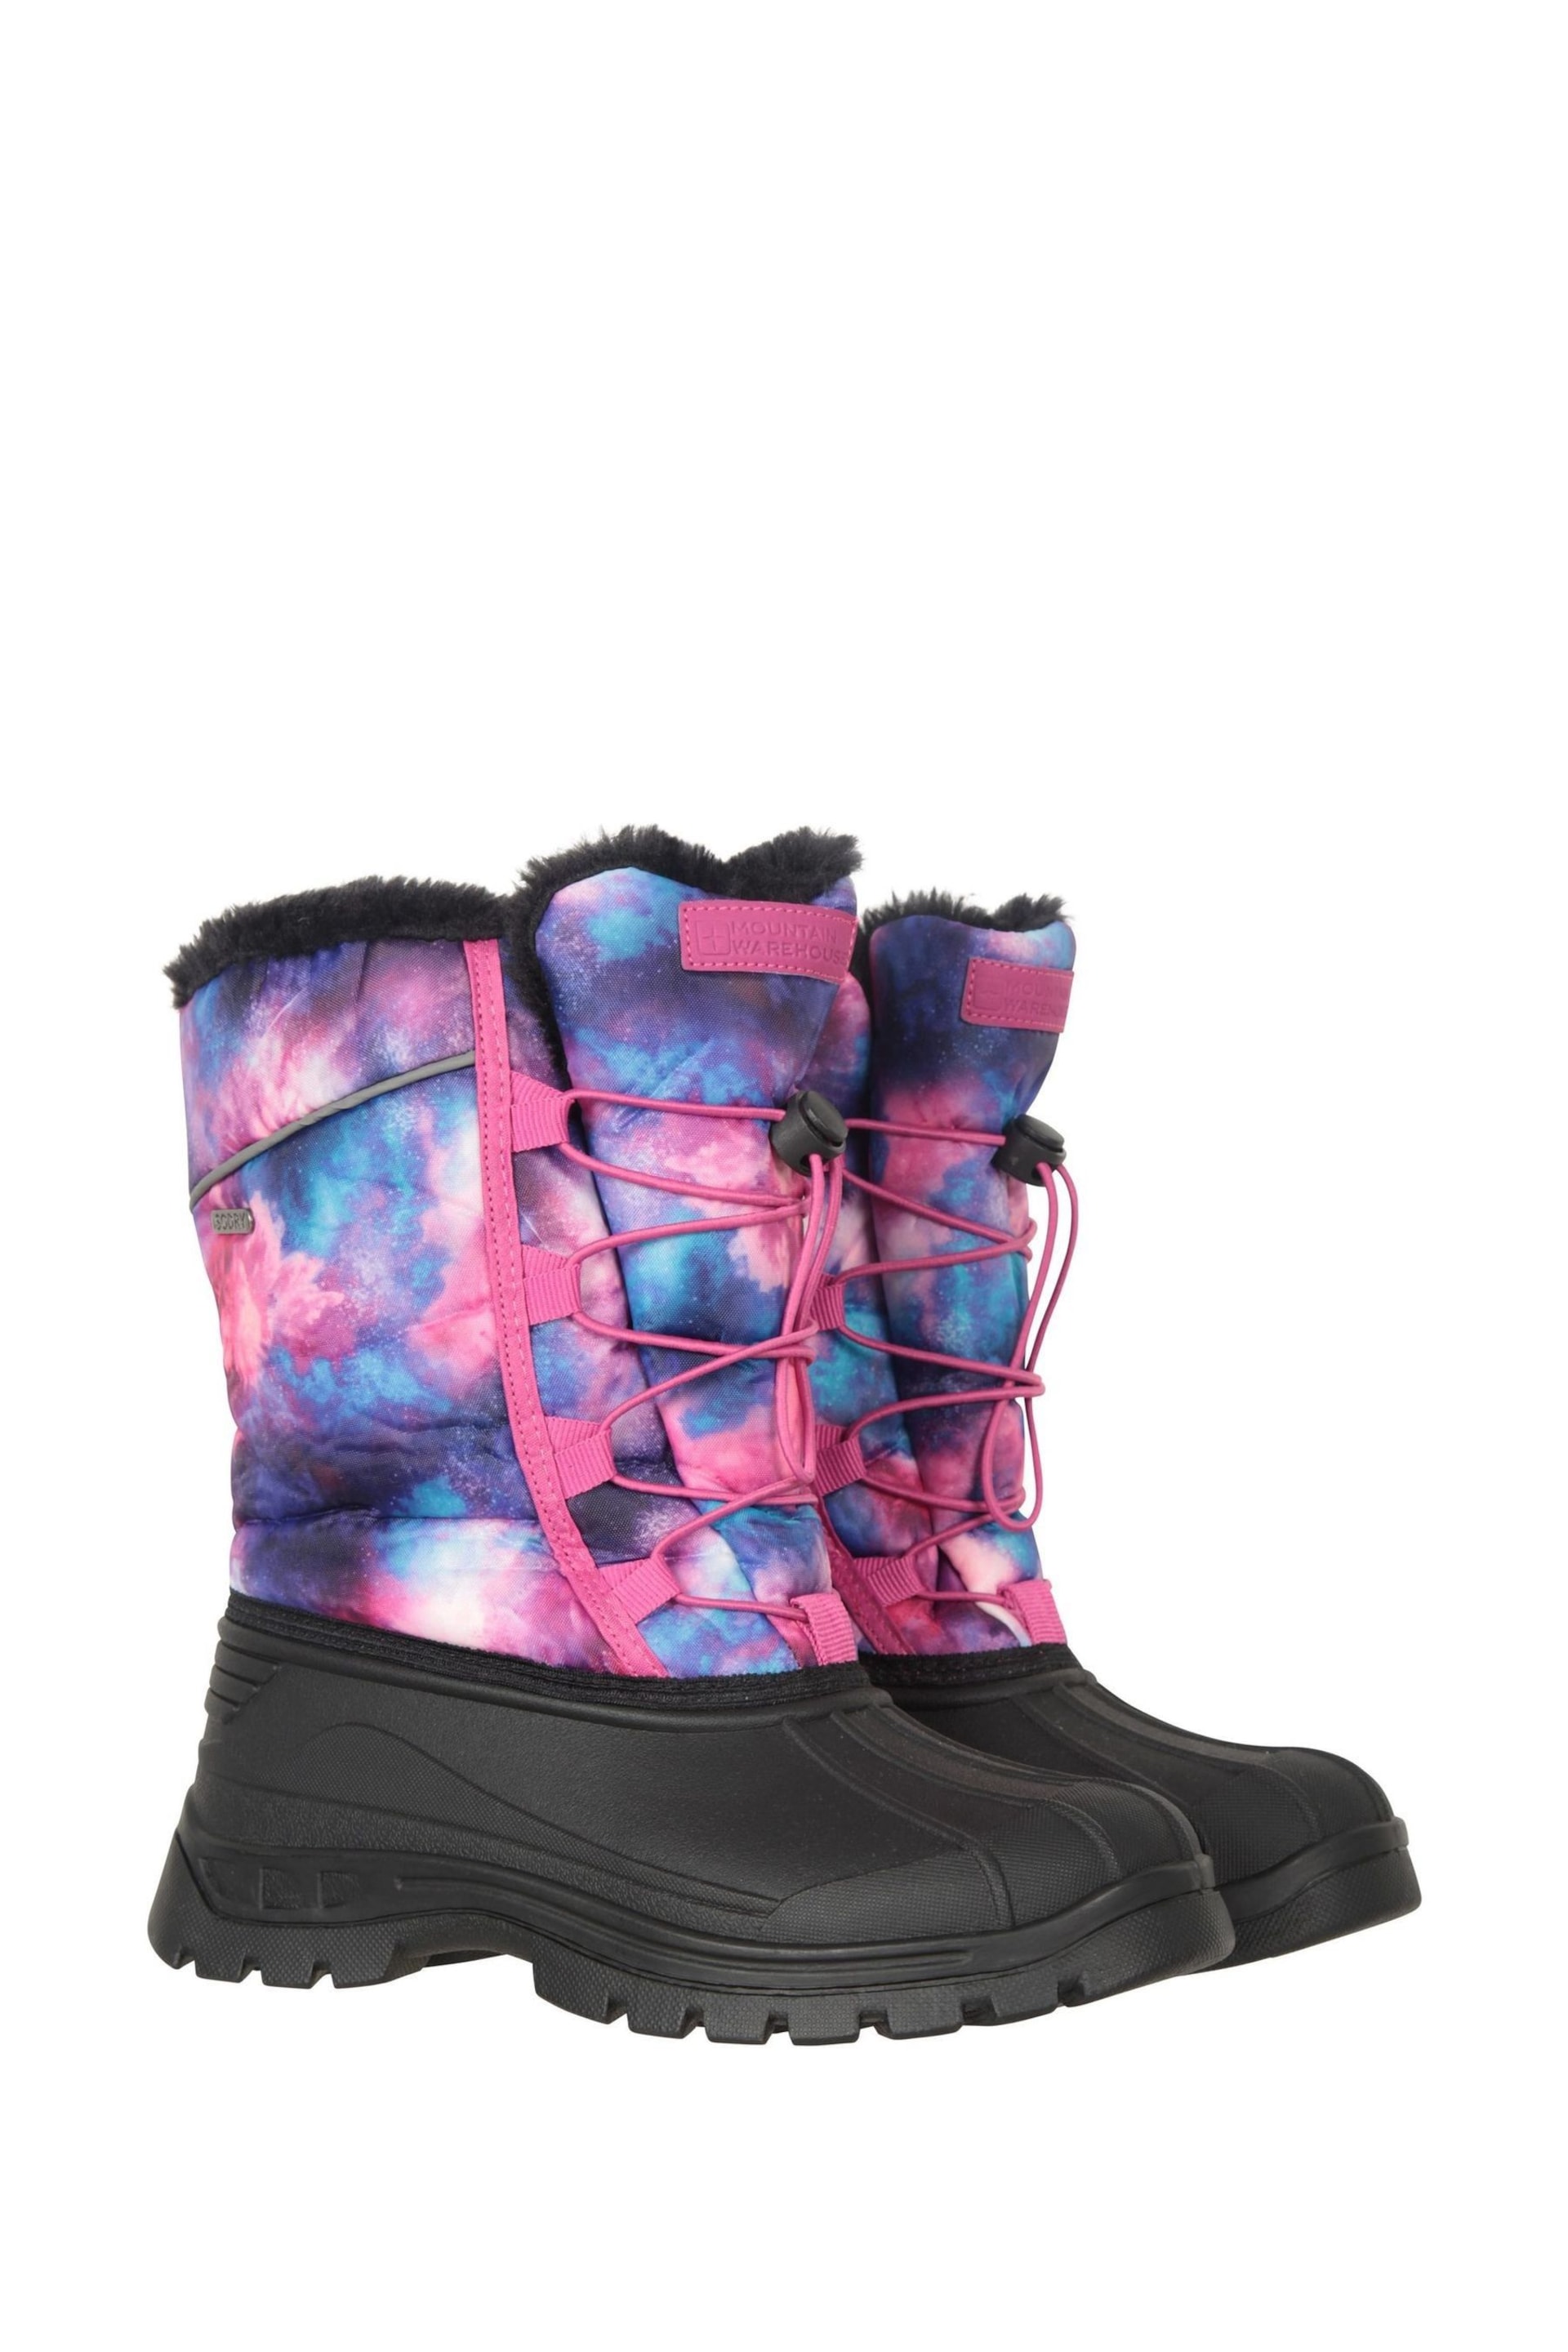 Mountain Warehouse Purple/Pink Kids Whistler Sherpa Lined Snow Boots - Image 1 of 6